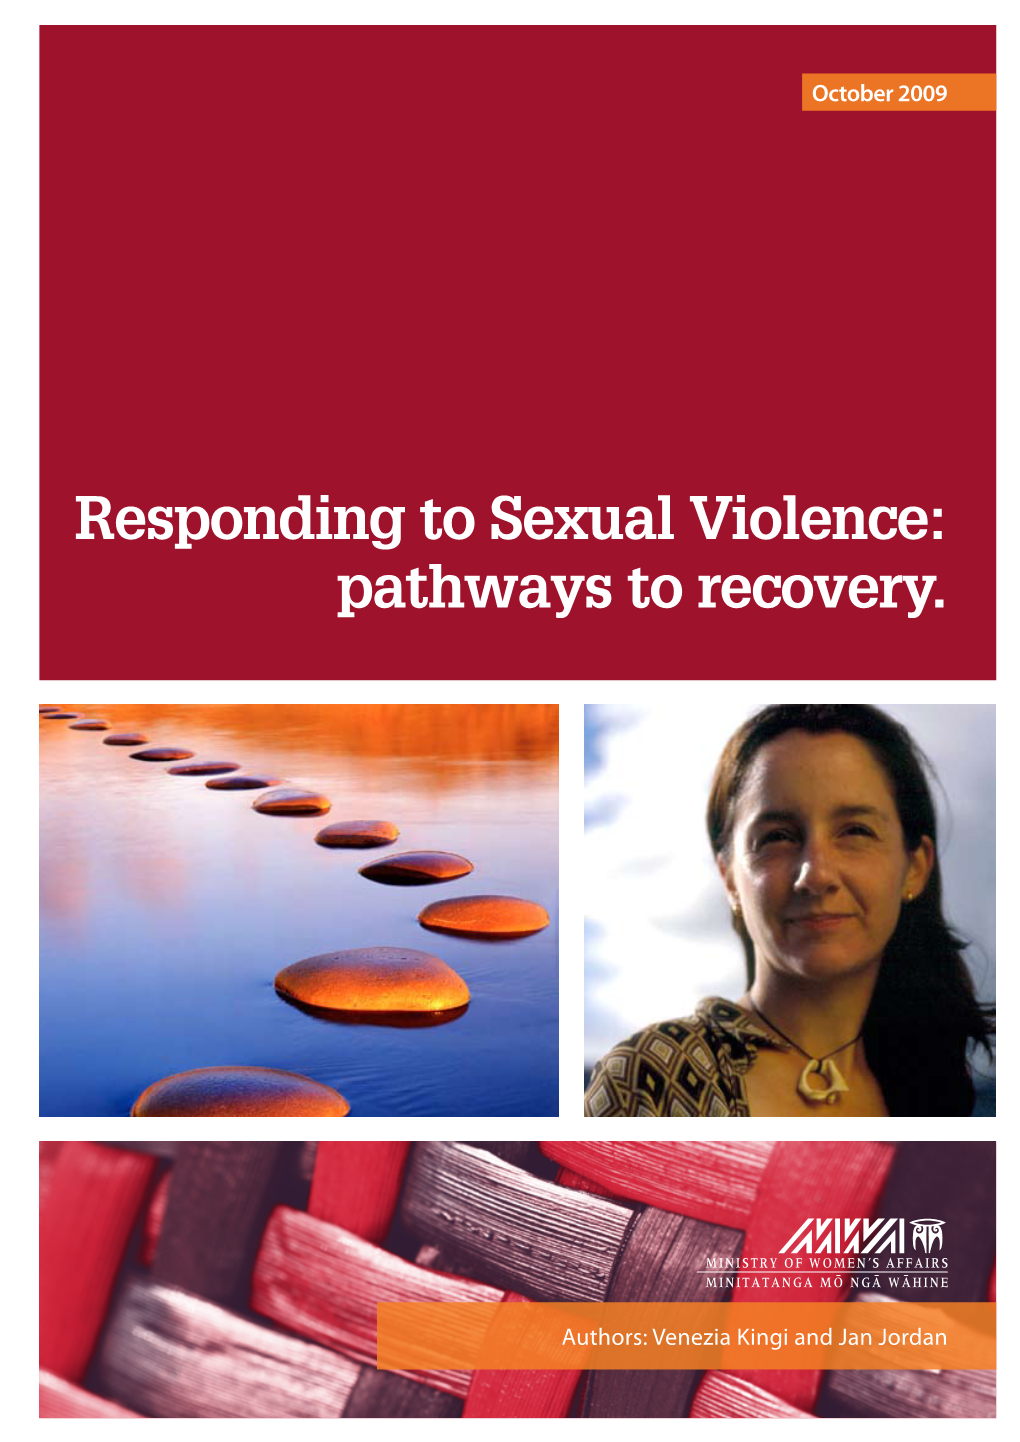 Responding to Sexual Violence: Pathways to Recovery